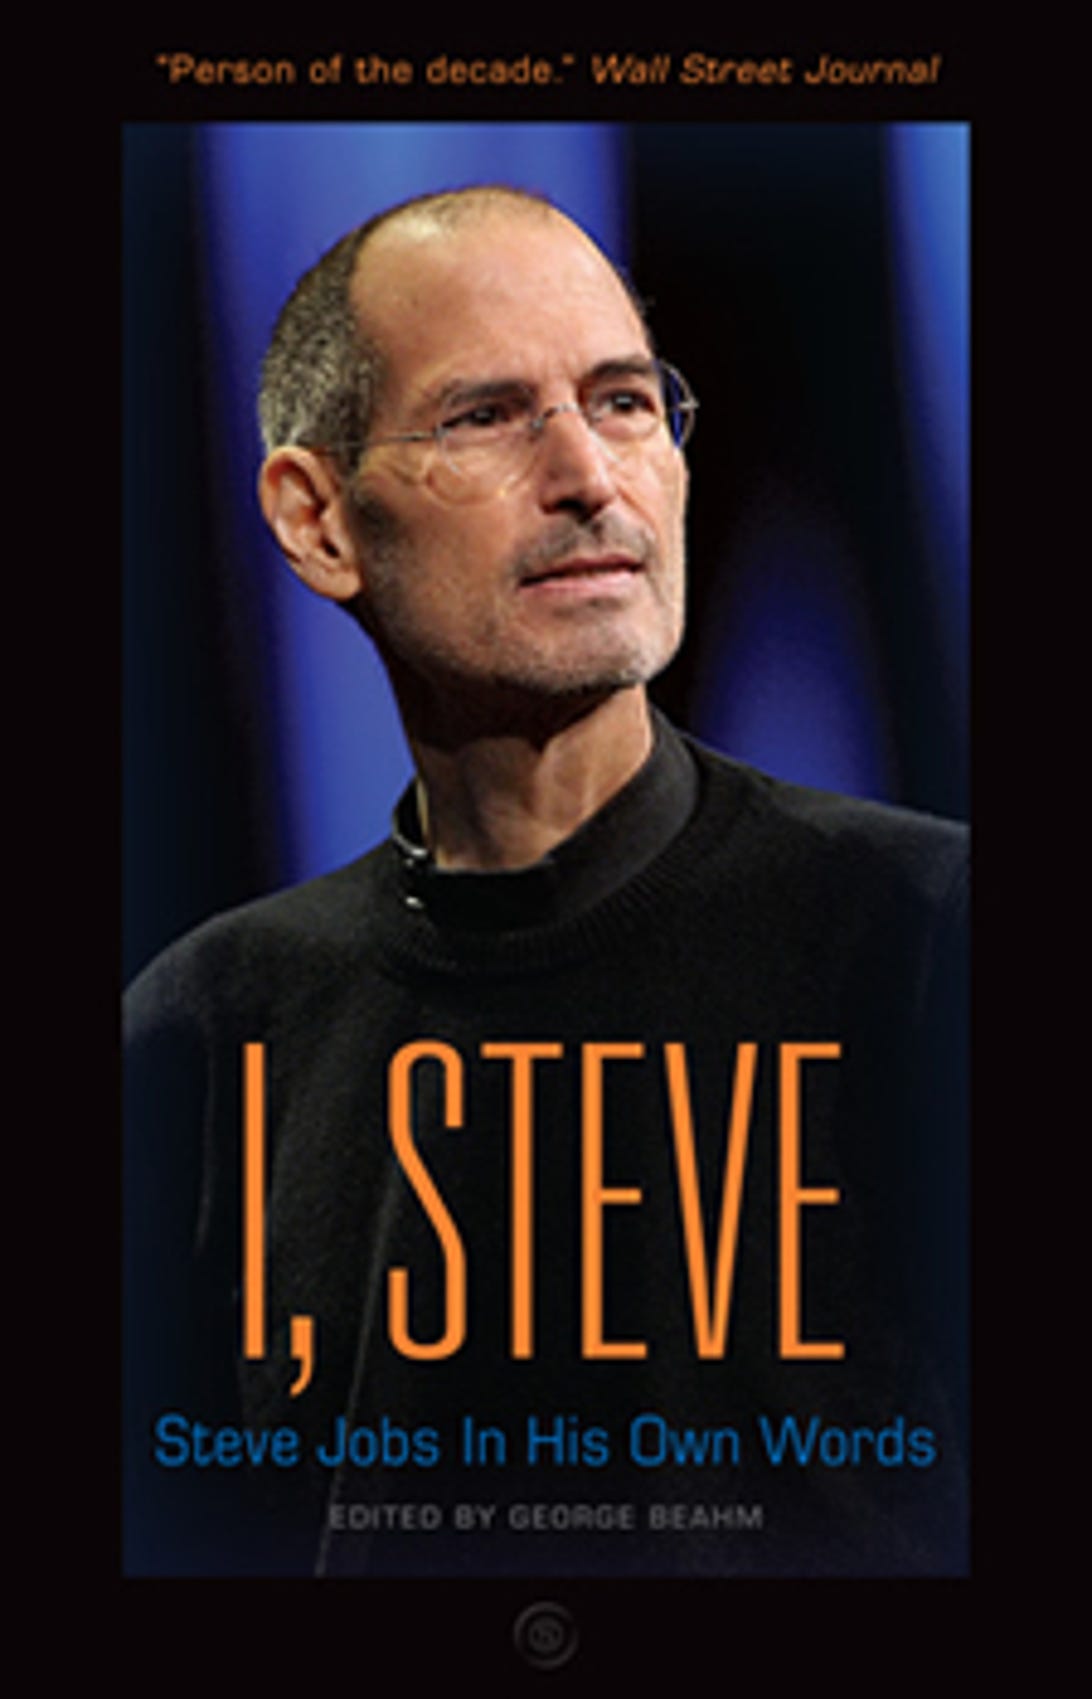 book review of steve jobs